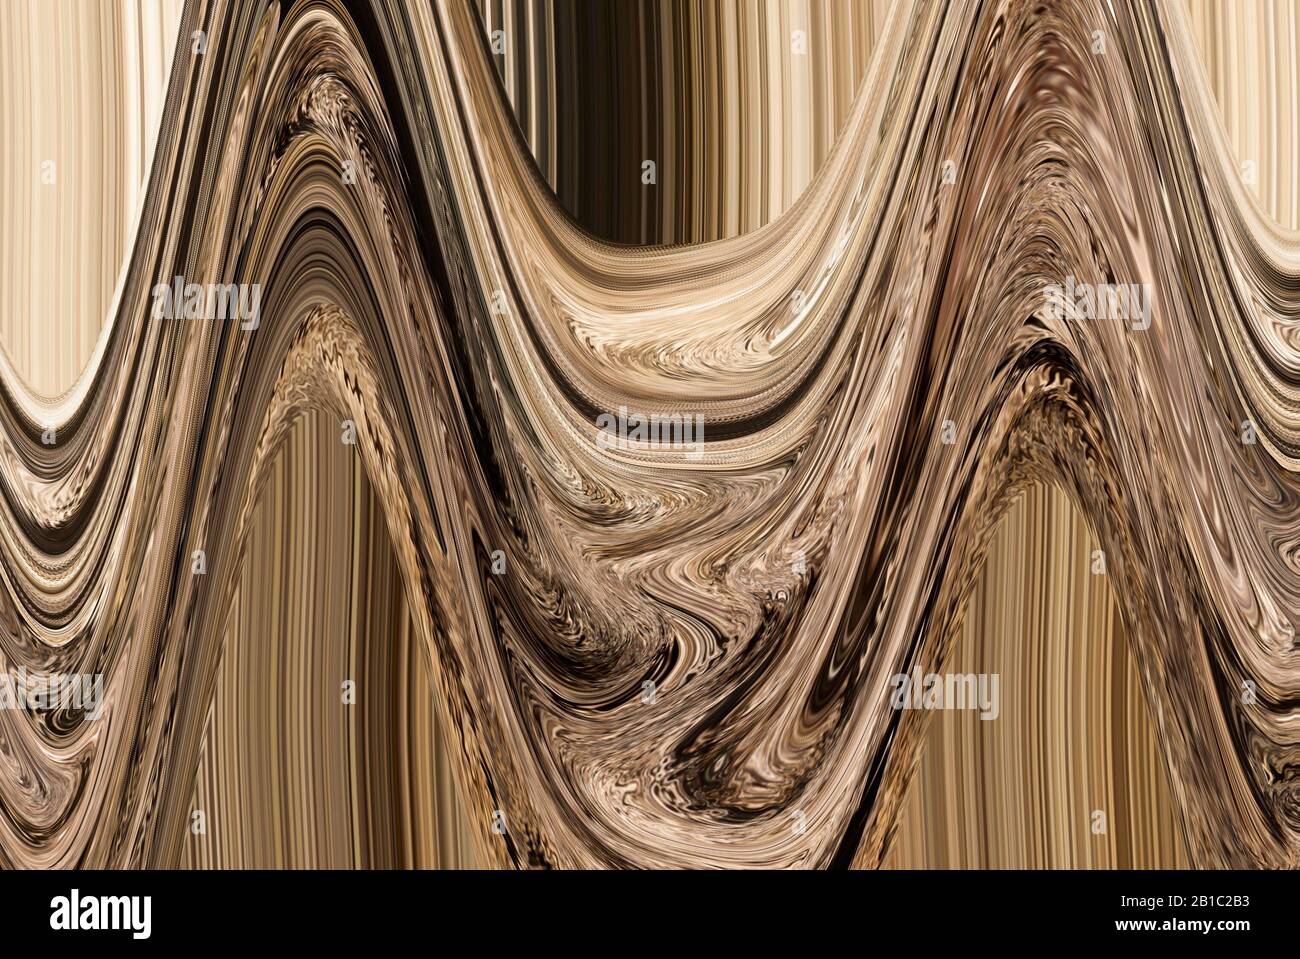 MARBLE PARADOX: A piece of wood evolves into a fine arts presentation series after many digital manipulations and distortion effects. Stock Photo